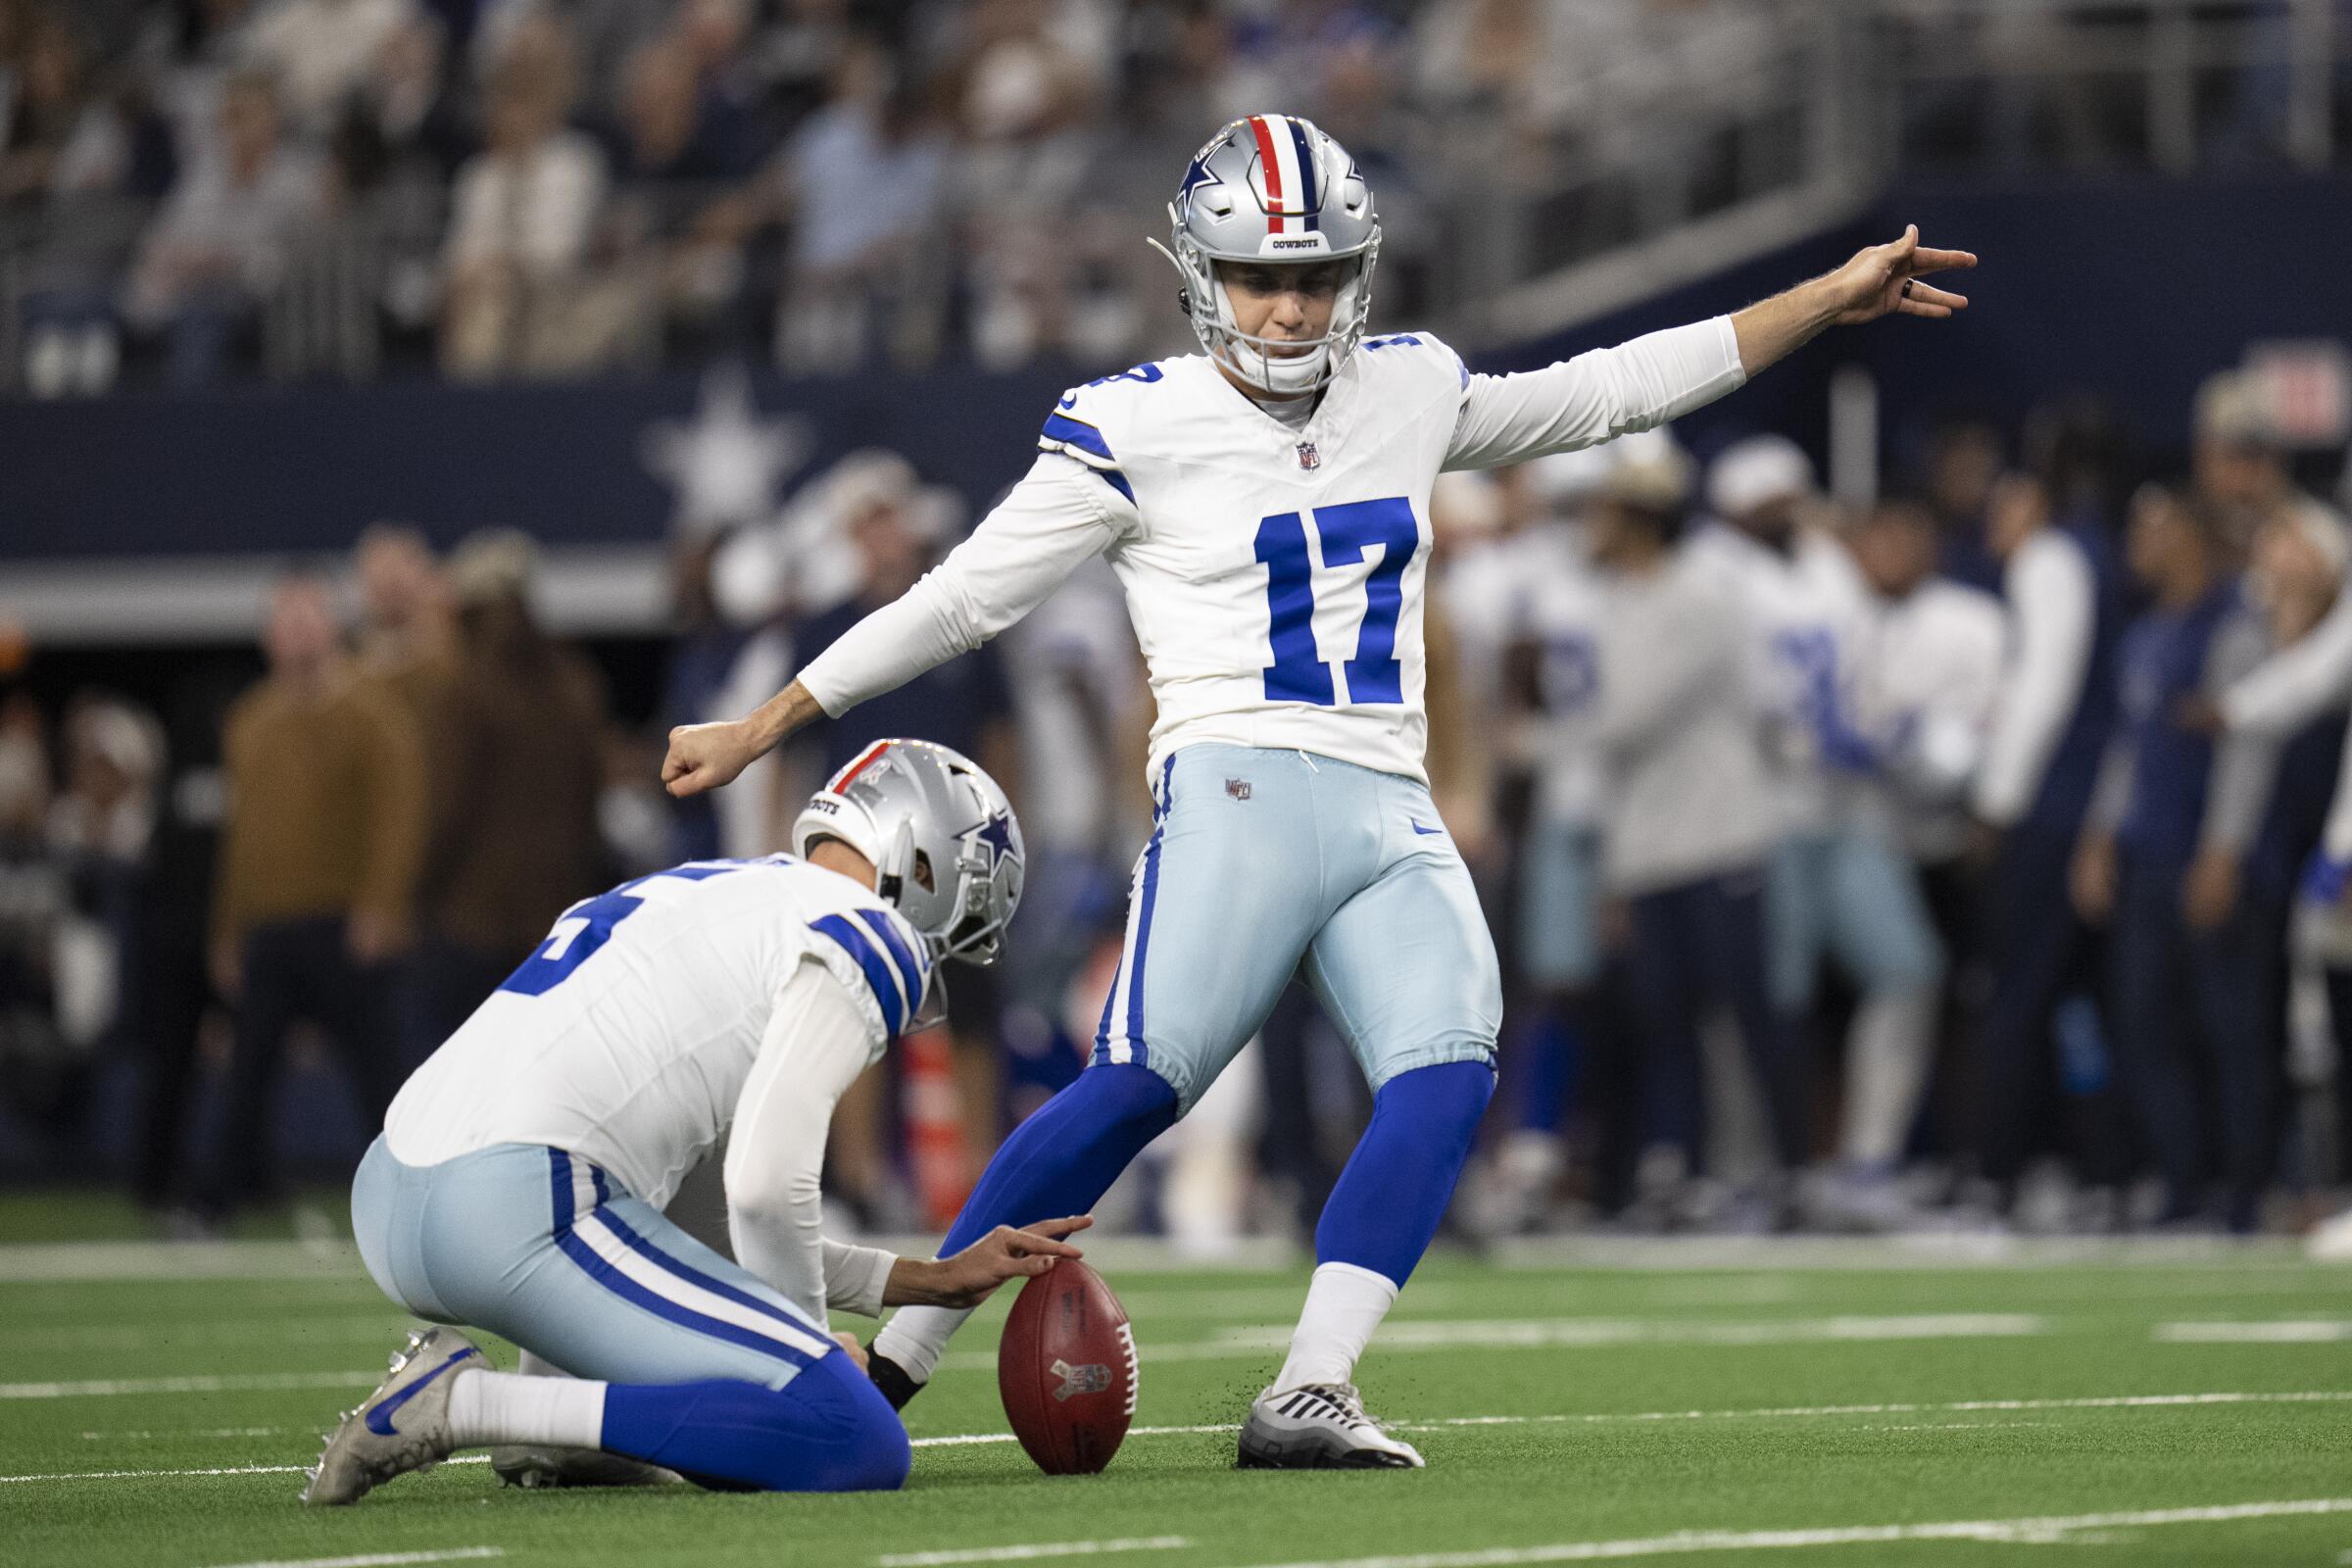 Brandon Aubrey kicks an extra-point attempt during the Dallas Cowboys' win over the New York Giants on Nov. 12.